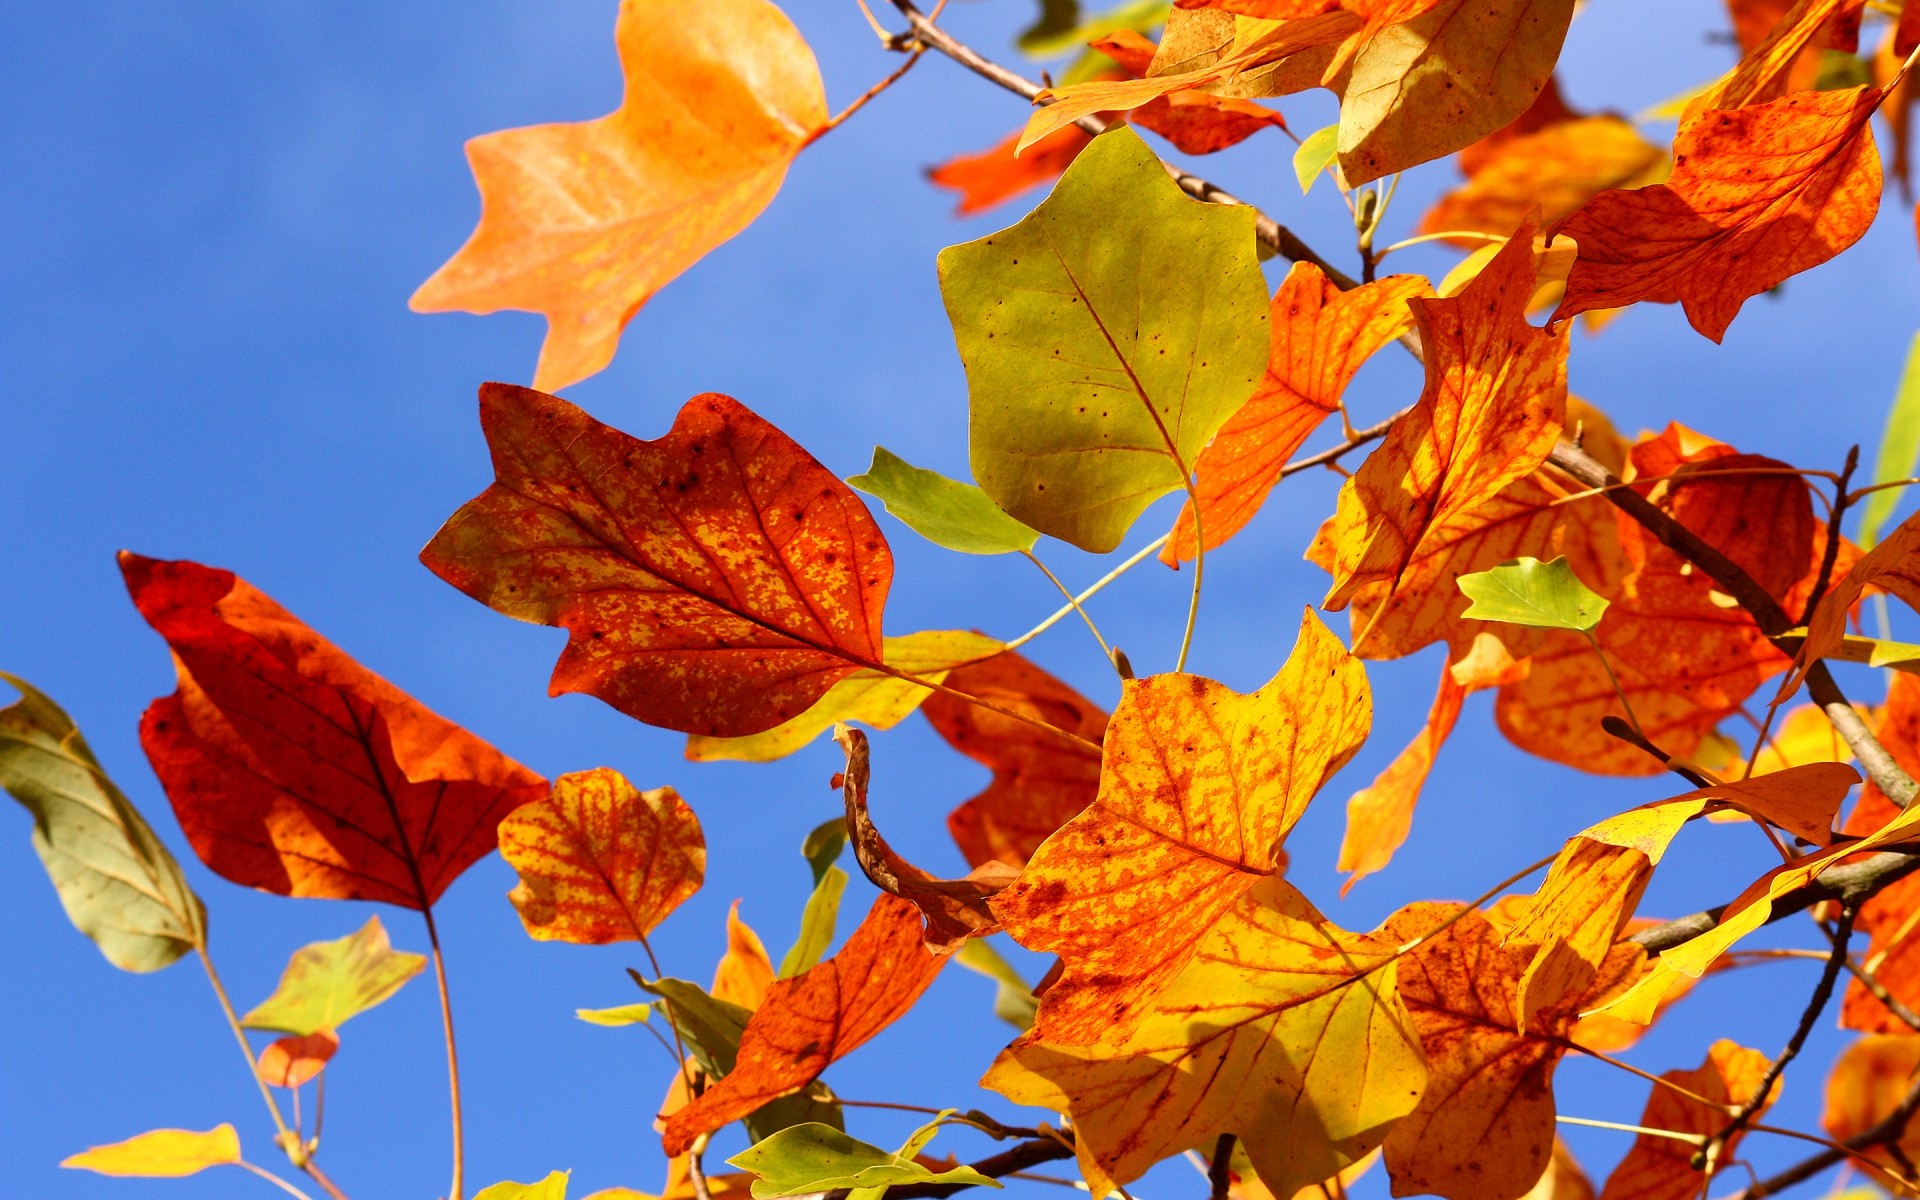 Autumn Colorful Leaves. Android wallpapers for free.